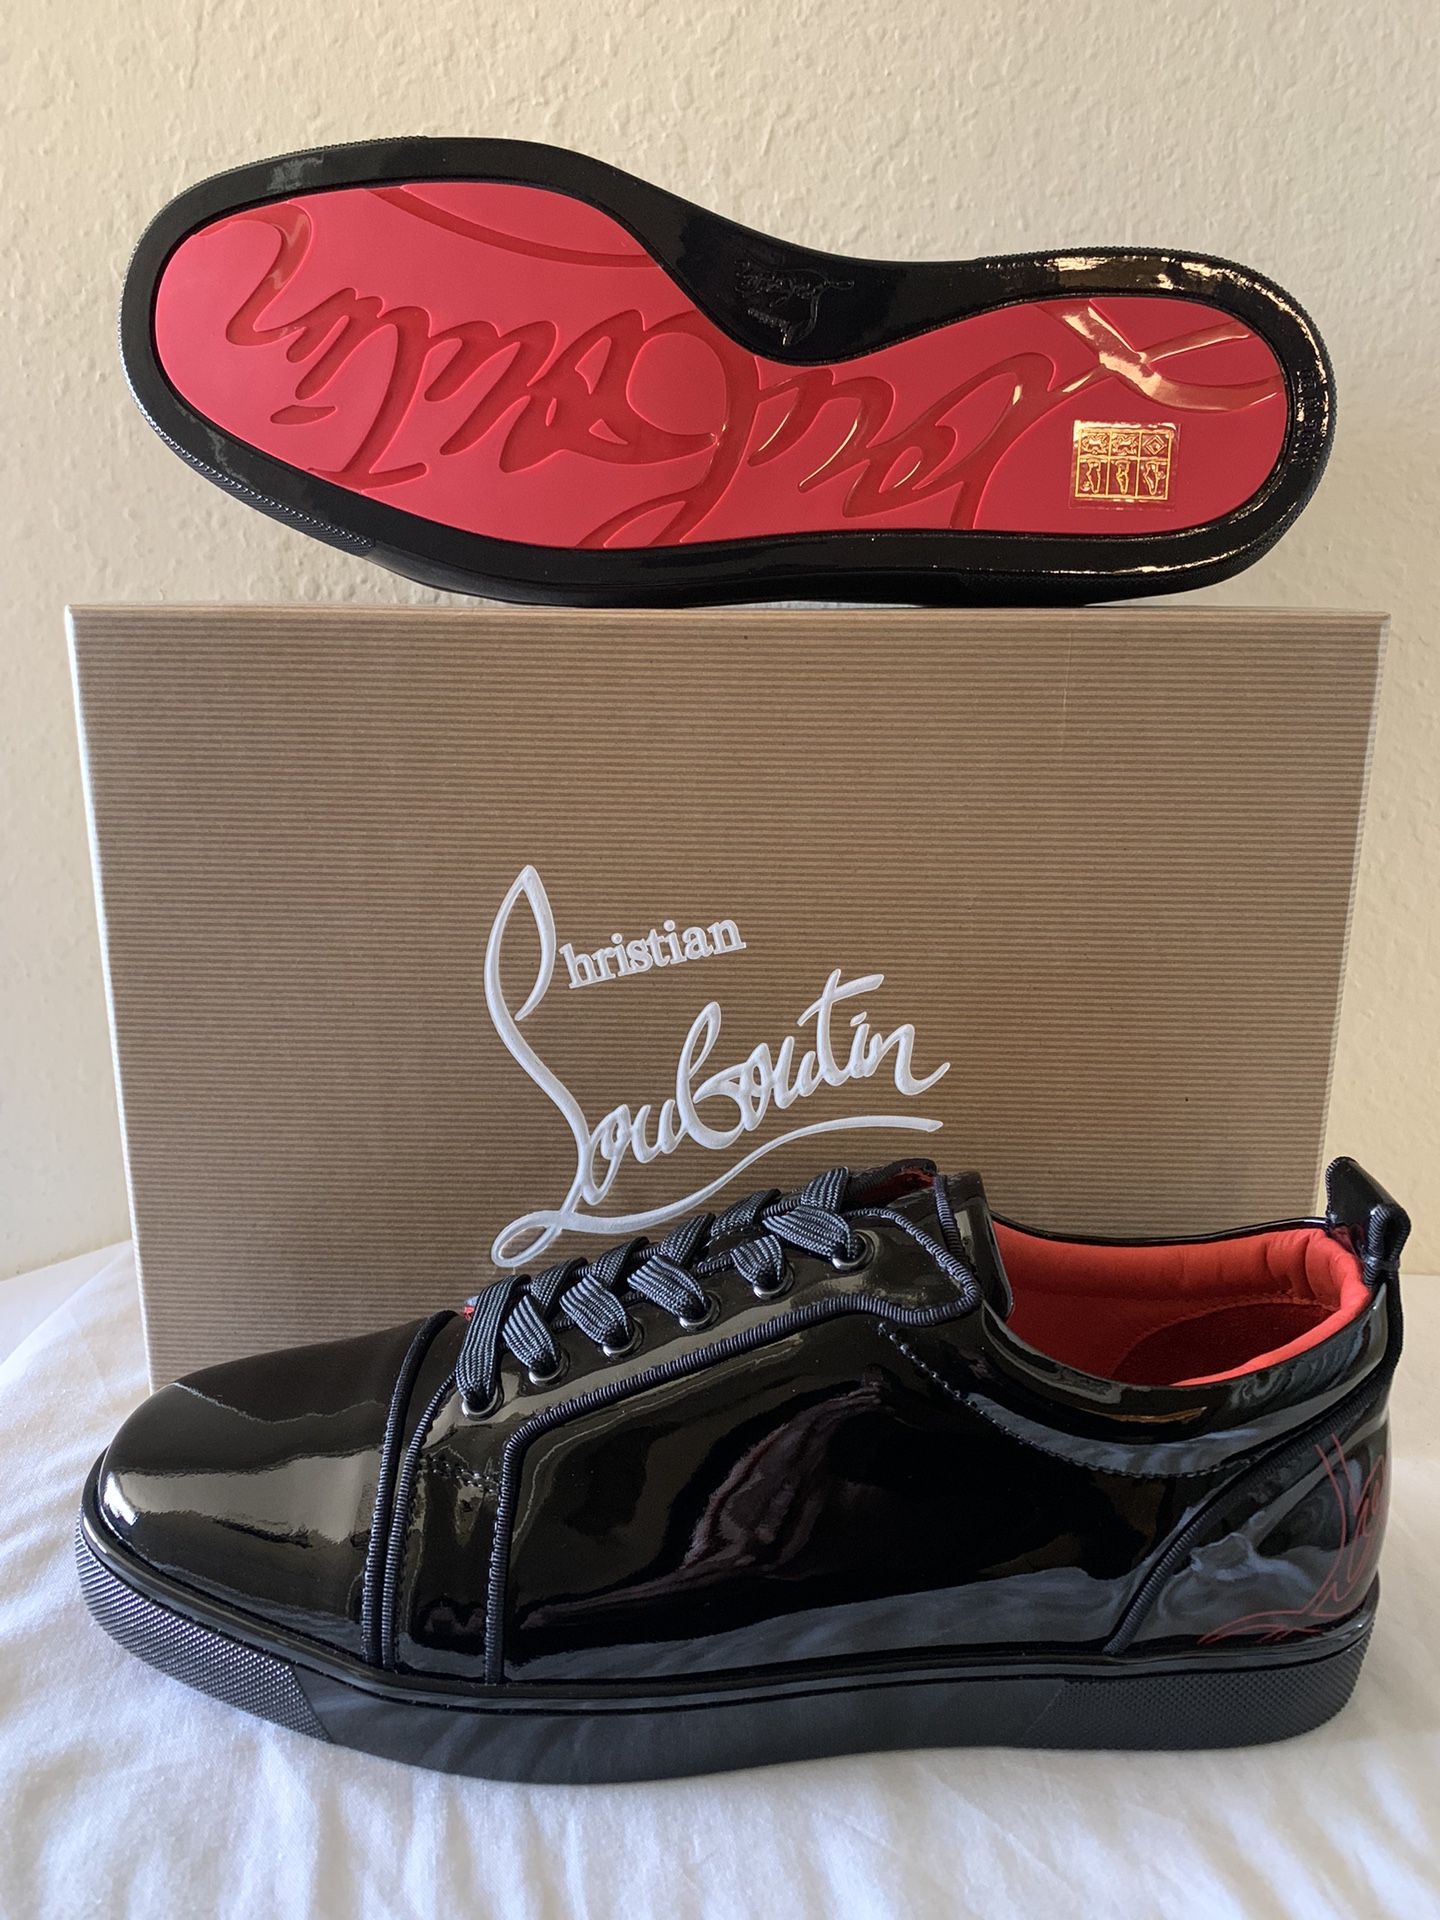 CHRISTIAN LOUBOUTIN RED BOTTOM SNEAKERS